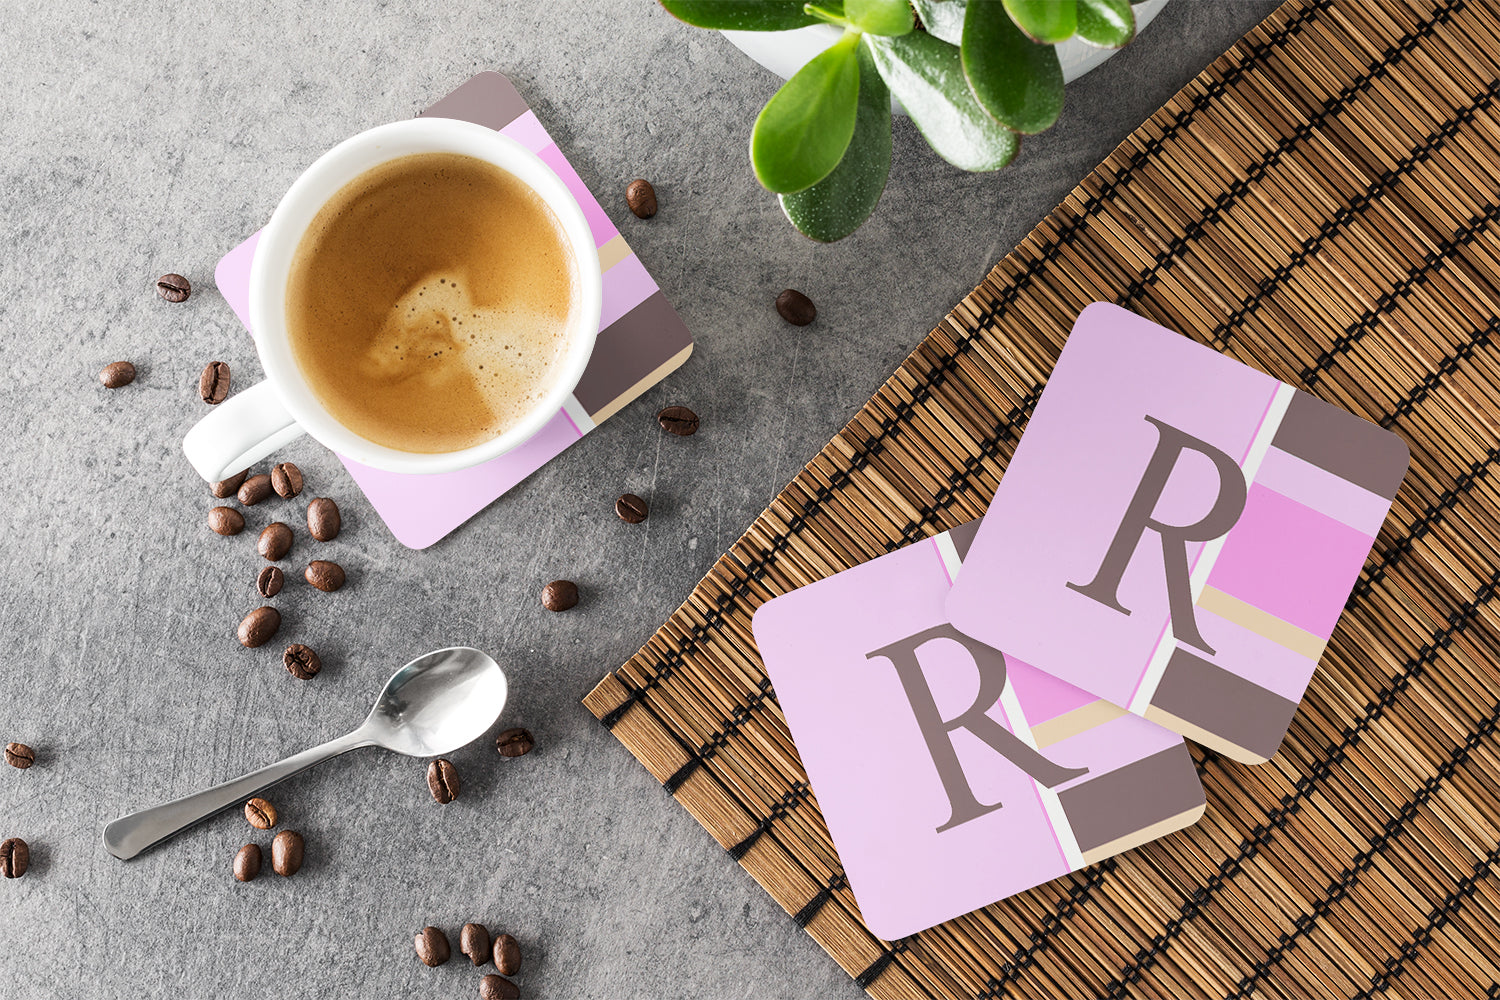 Set of 4 Monogram - Pink Stripes Foam Coasters Initial Letter R - the-store.com